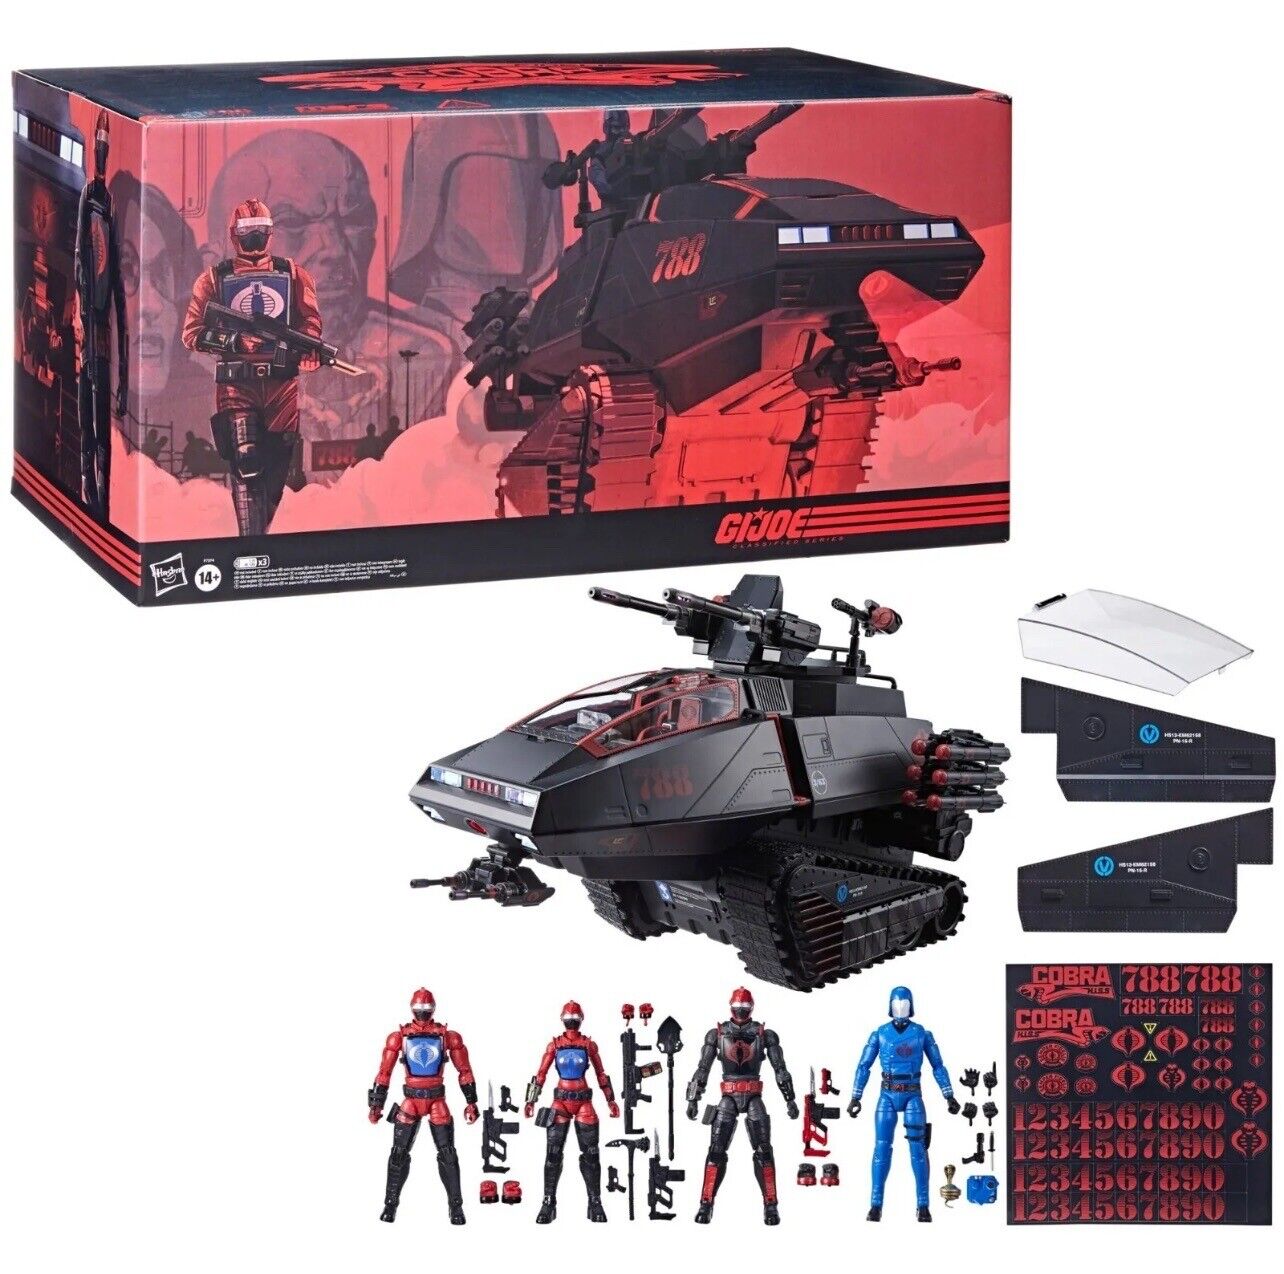 Haslabs Cobra H.I.S.S tank, with figures and accessories